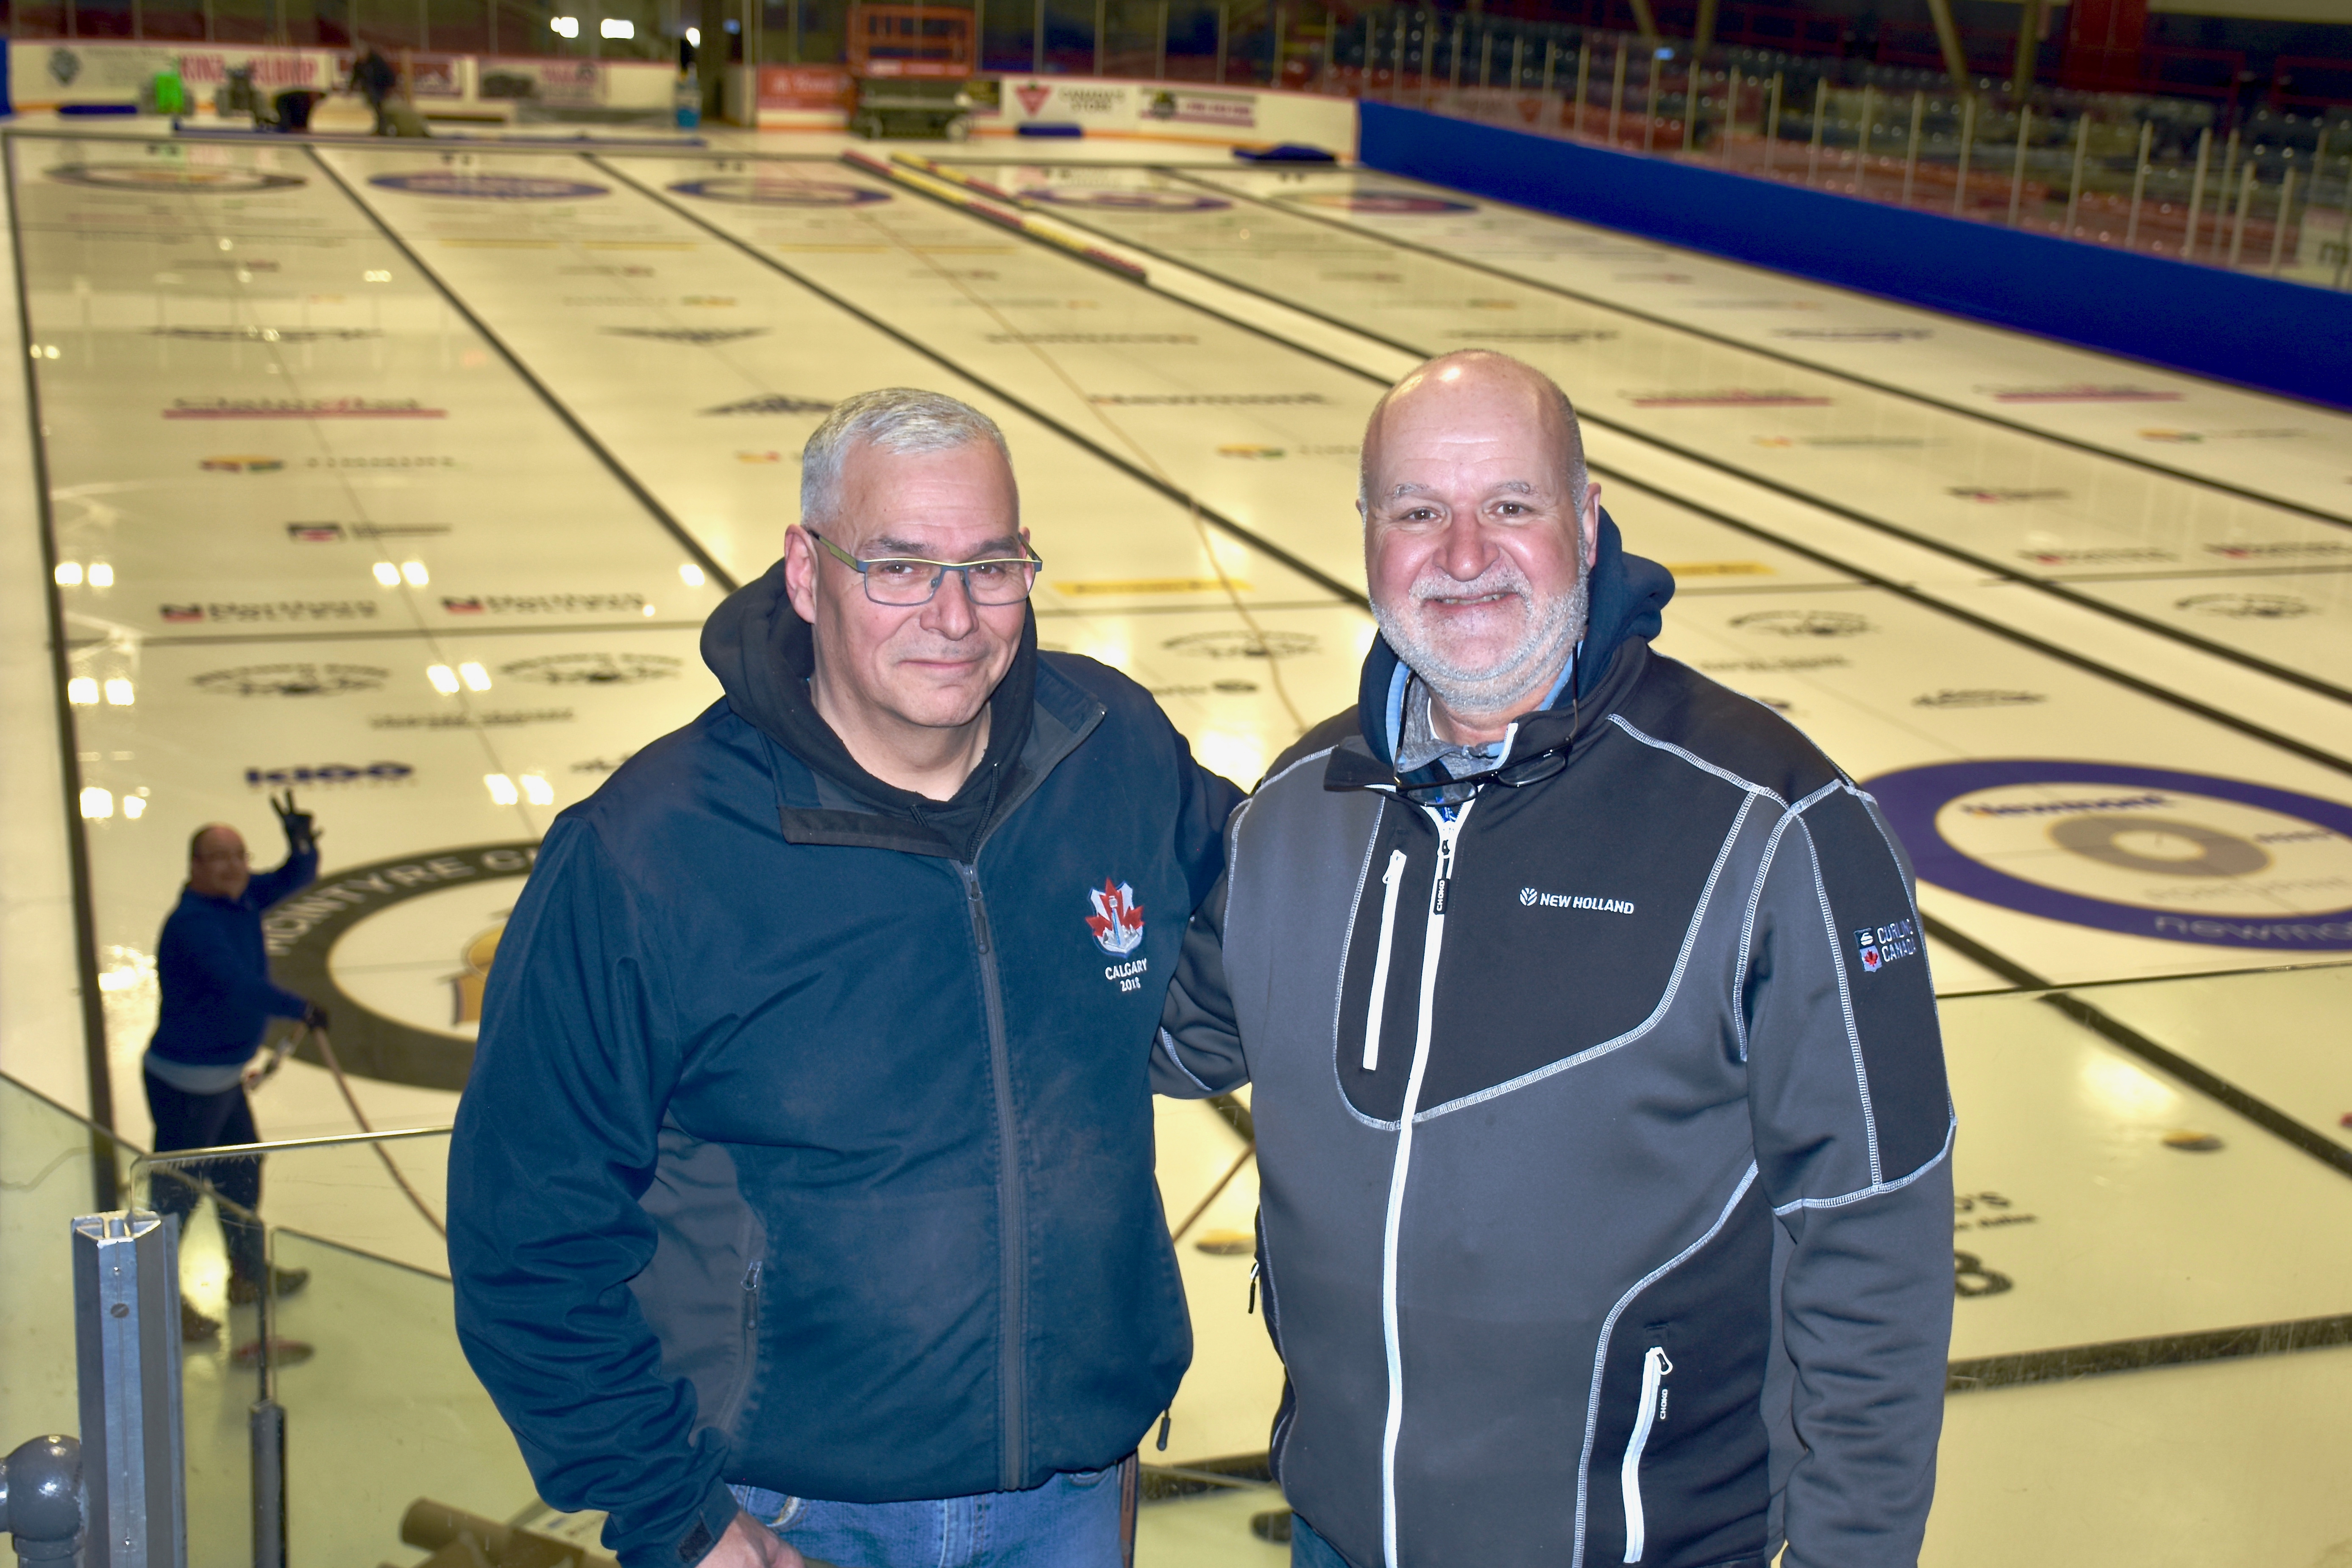 Biggest curling event ever in Timmins ready to hit the ice